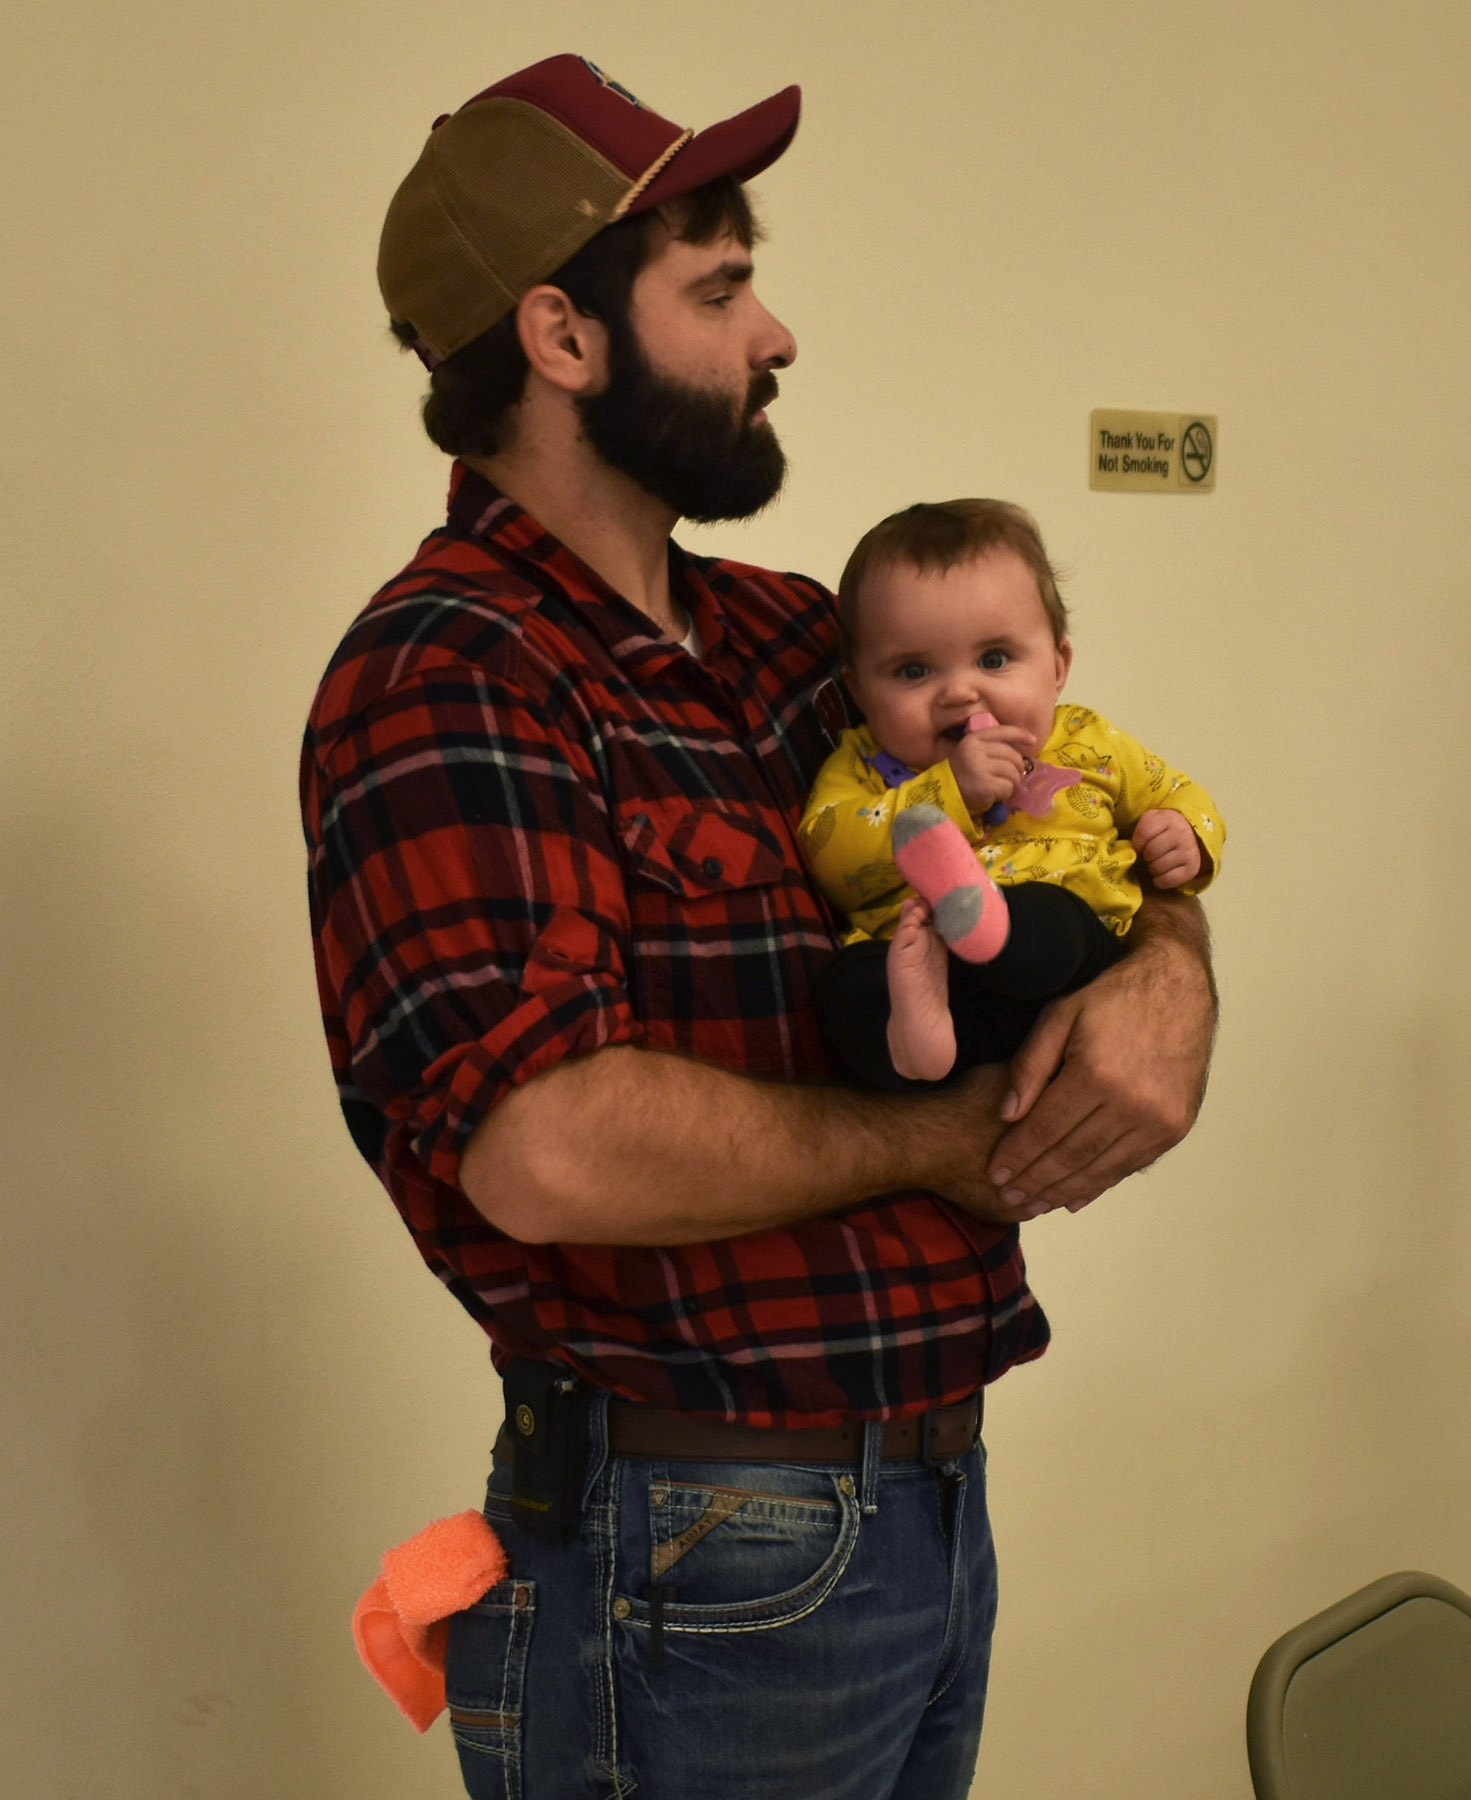 Justin Bloch holds his daughter, Jennifer, at a community benefit for the family in Merrill